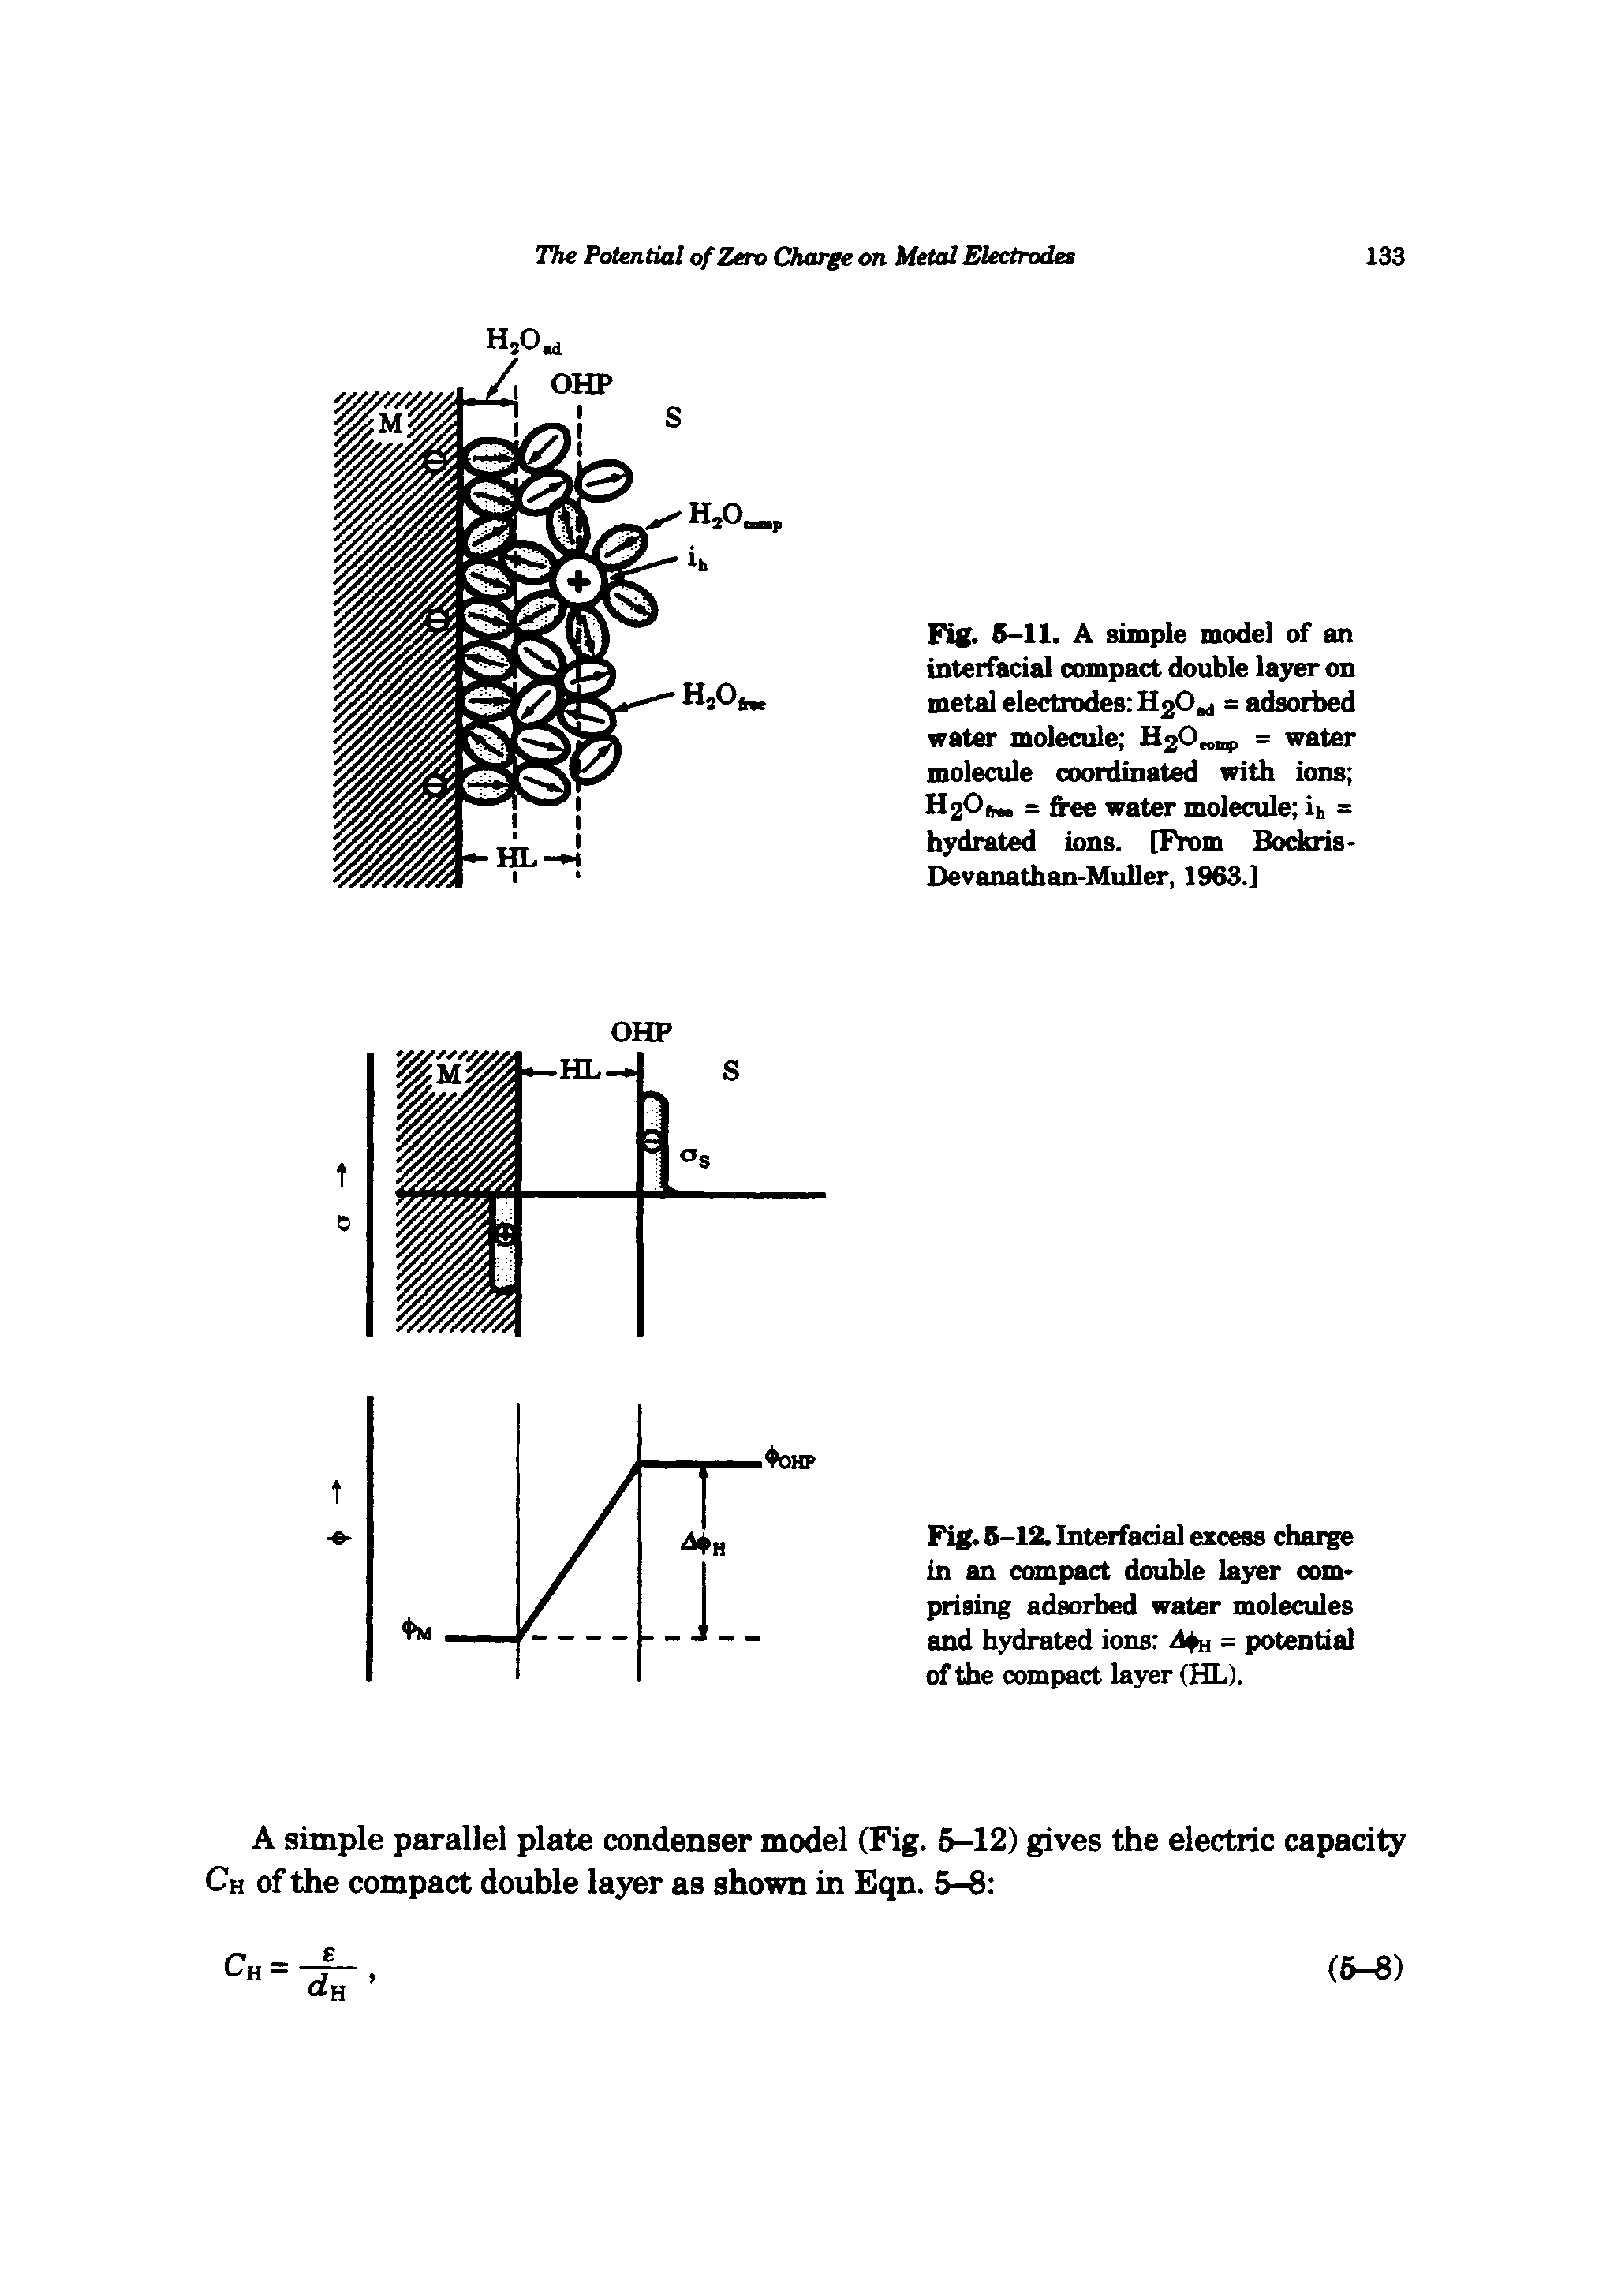 Fig. 5-11. A simple model of an interfacial compact double layer on metal electrodes H20,j = adsorbed water molecule H20. = water molecule coordinated with ions H20 . = free water molecule ih = hydrated ions. [From Bockiis-Devanathan-Muller, 1963.]...